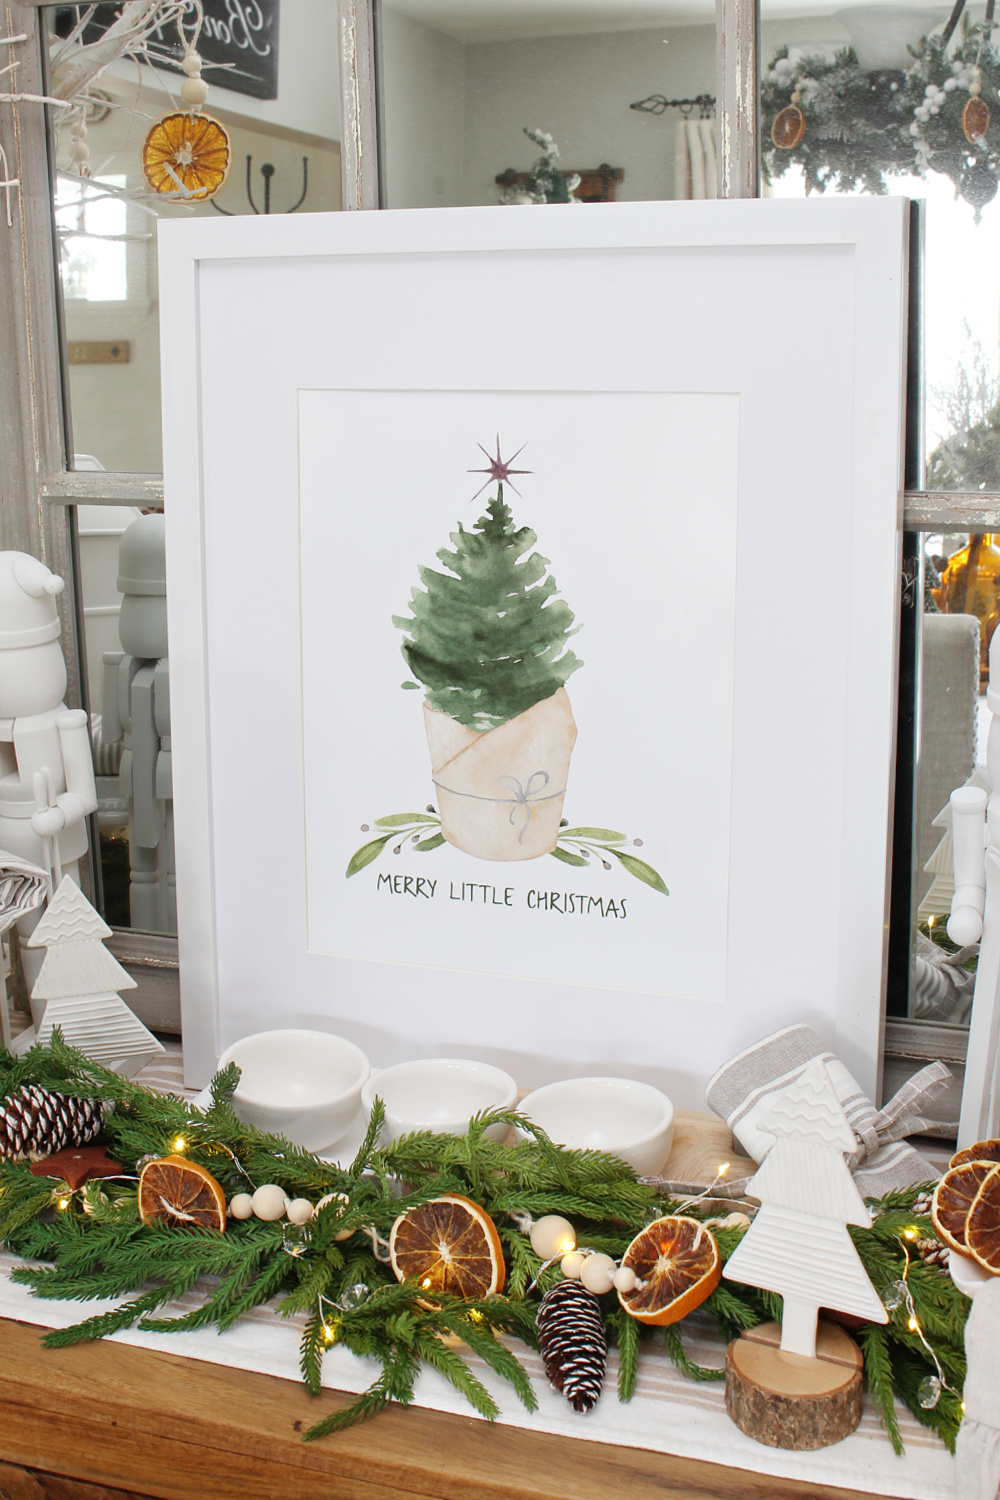 Merry Little Christmas free Christmas printable with watercolor tree.